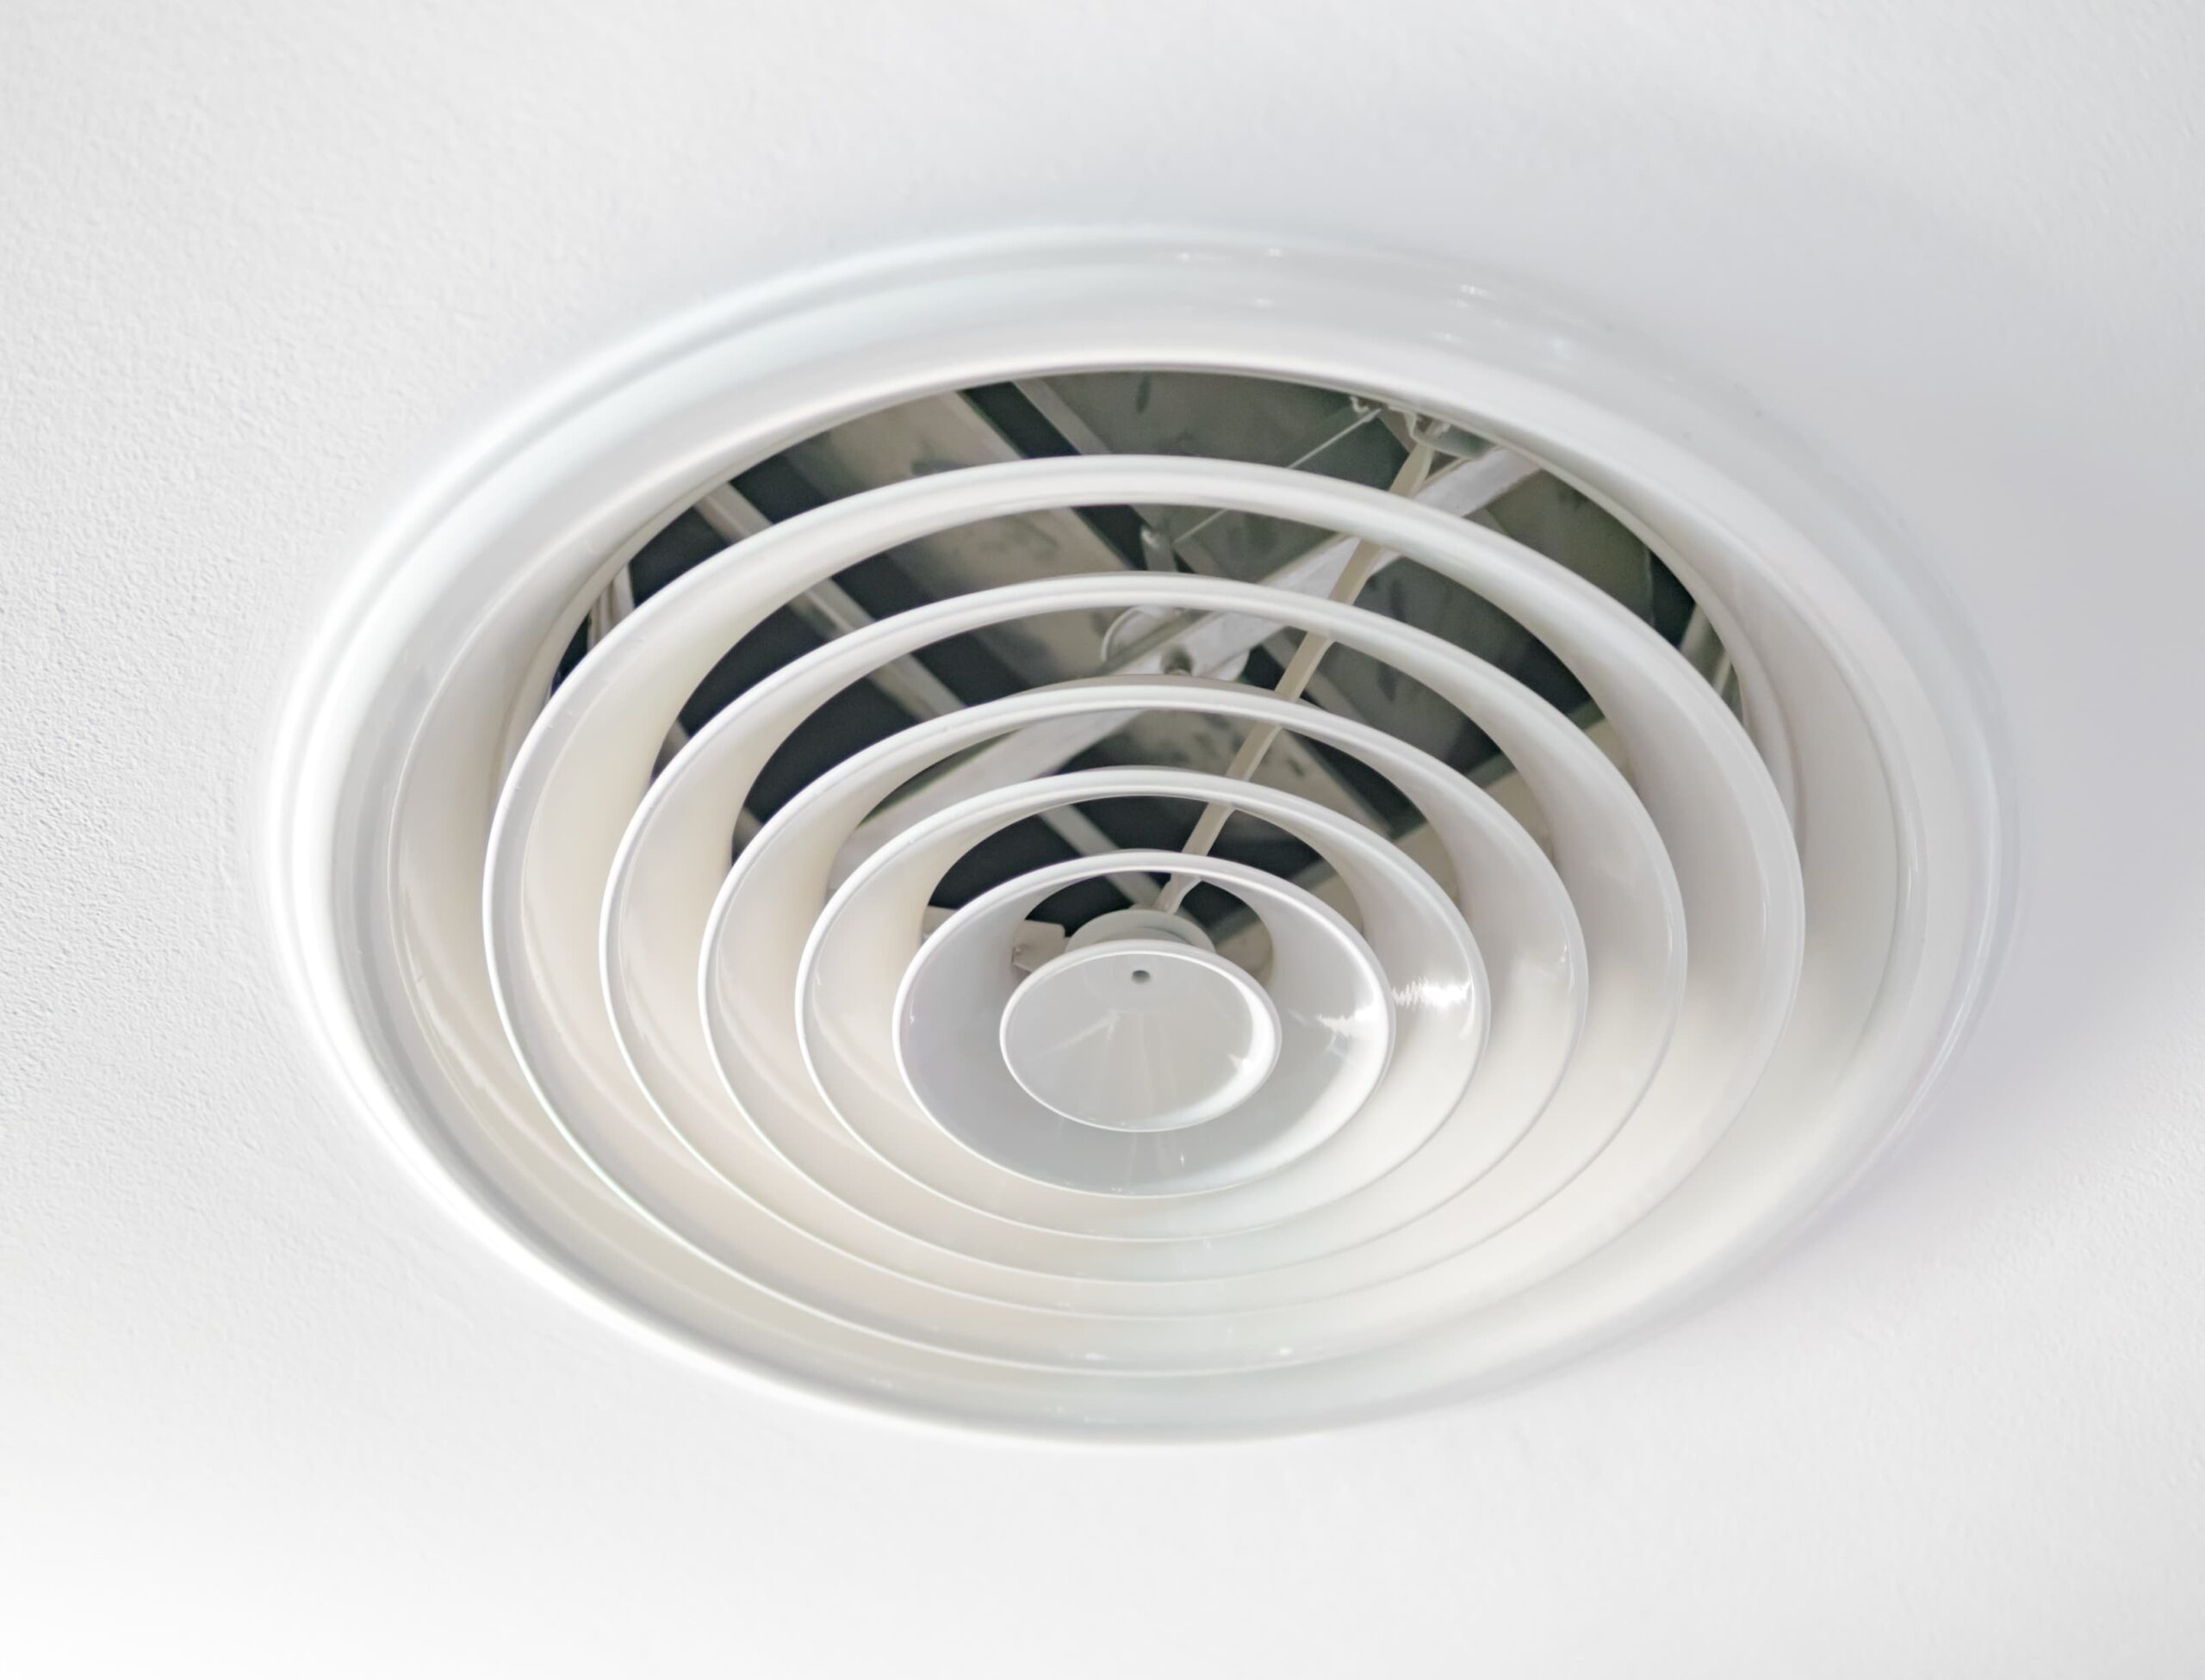 closeup of an air duct output vent on the ceiling